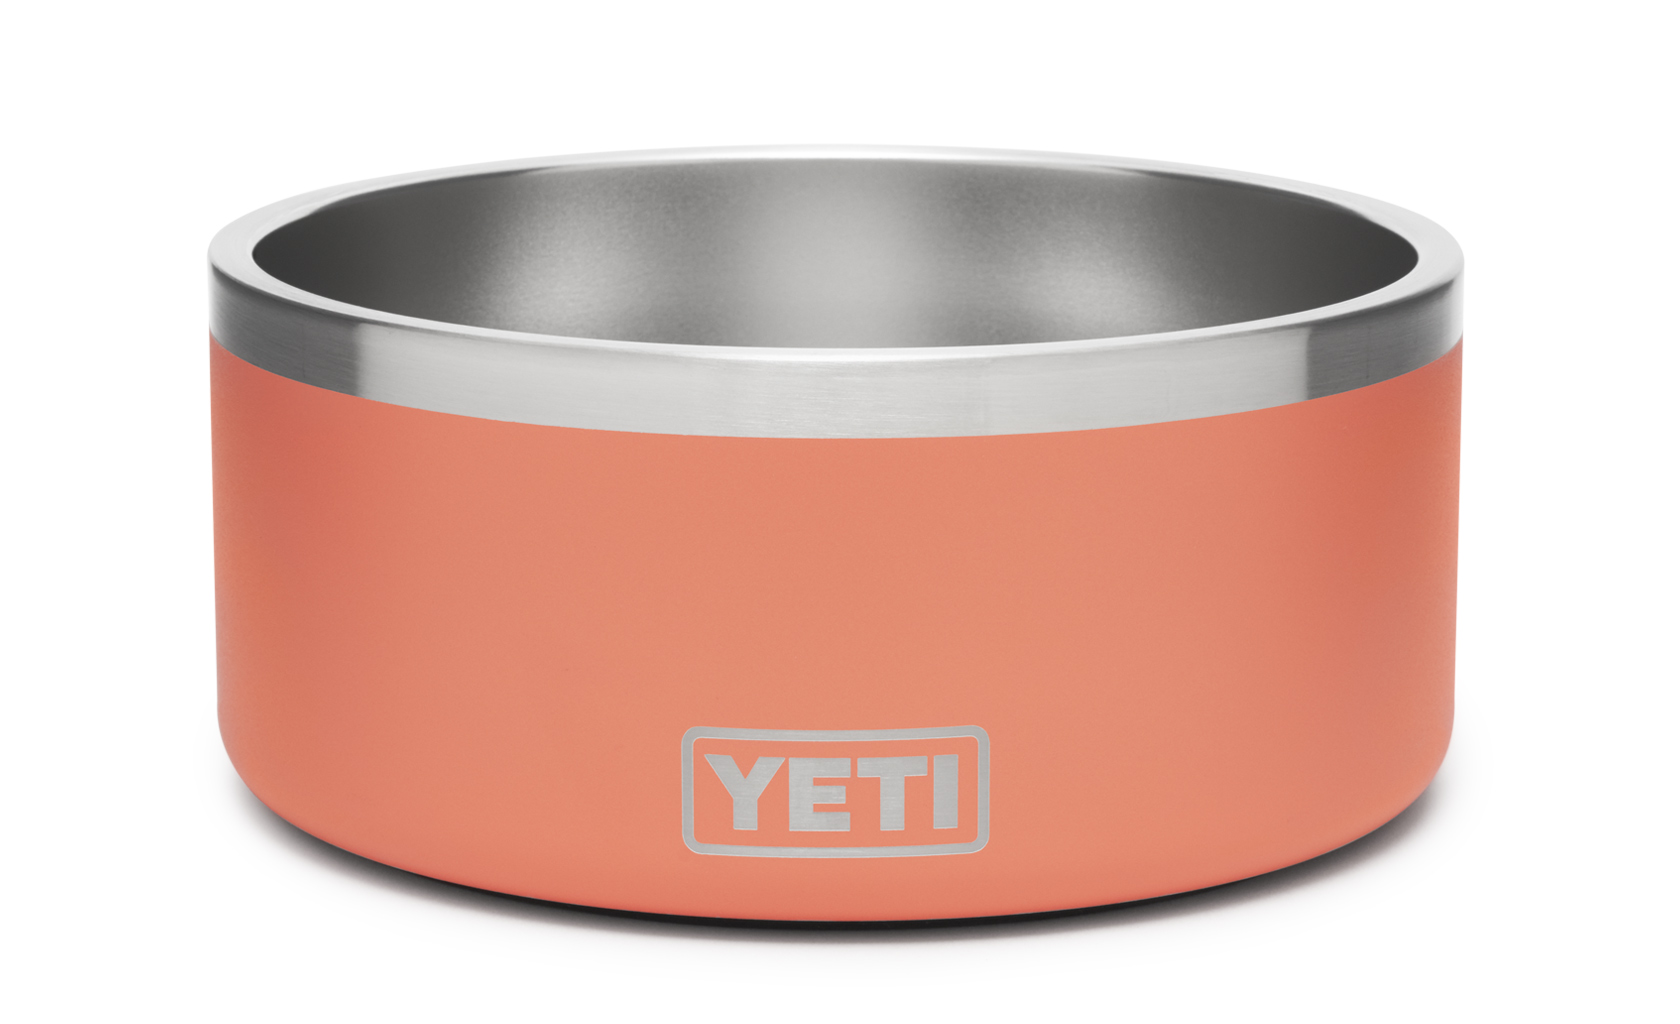 https://www.yeti.com/on/demandware.static/-/Sites-masterCatalog_Yeti/default/dw76fe6456/images/pdp-Boomer/Boomer-8/Coral/191239-Coral-Boomer-8-Website-Assets-Studio-PDP-Front-1680x1024.jpg